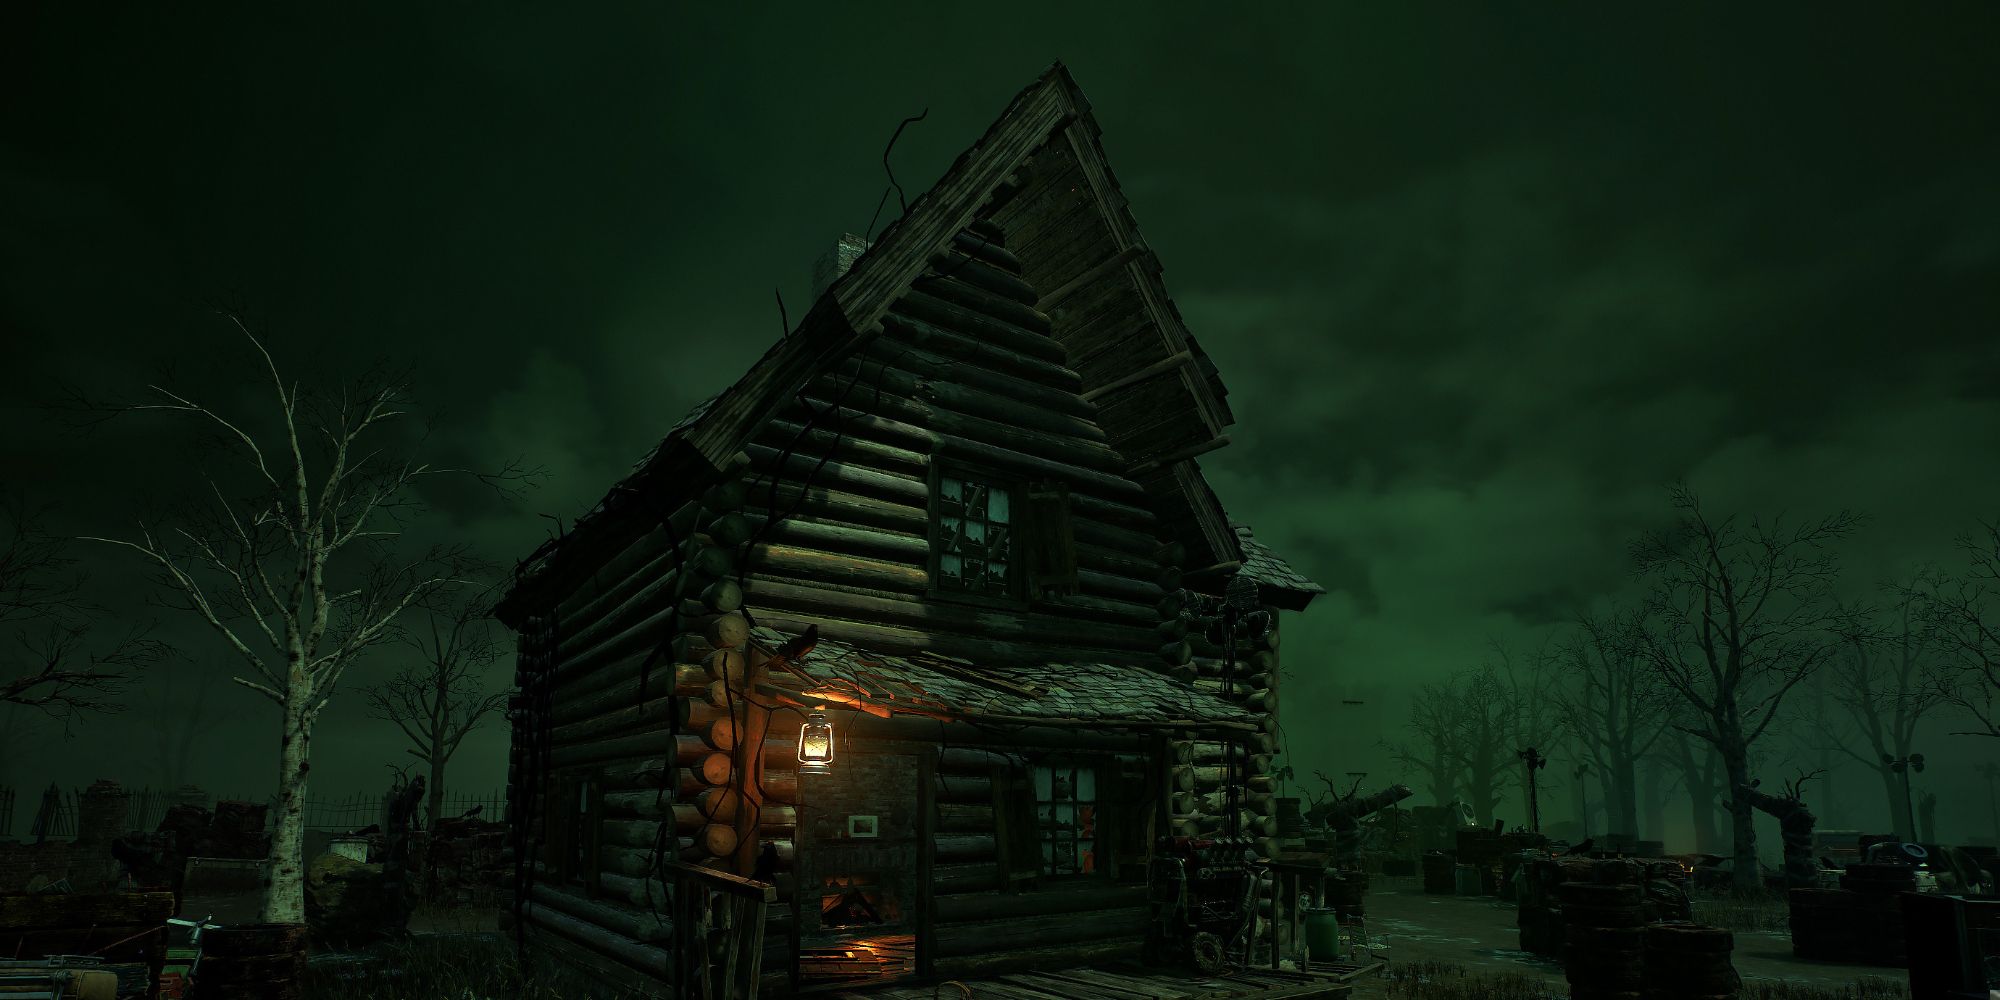 Dead by Daylight Autohaven Wreckers image of a decrepit wooden house